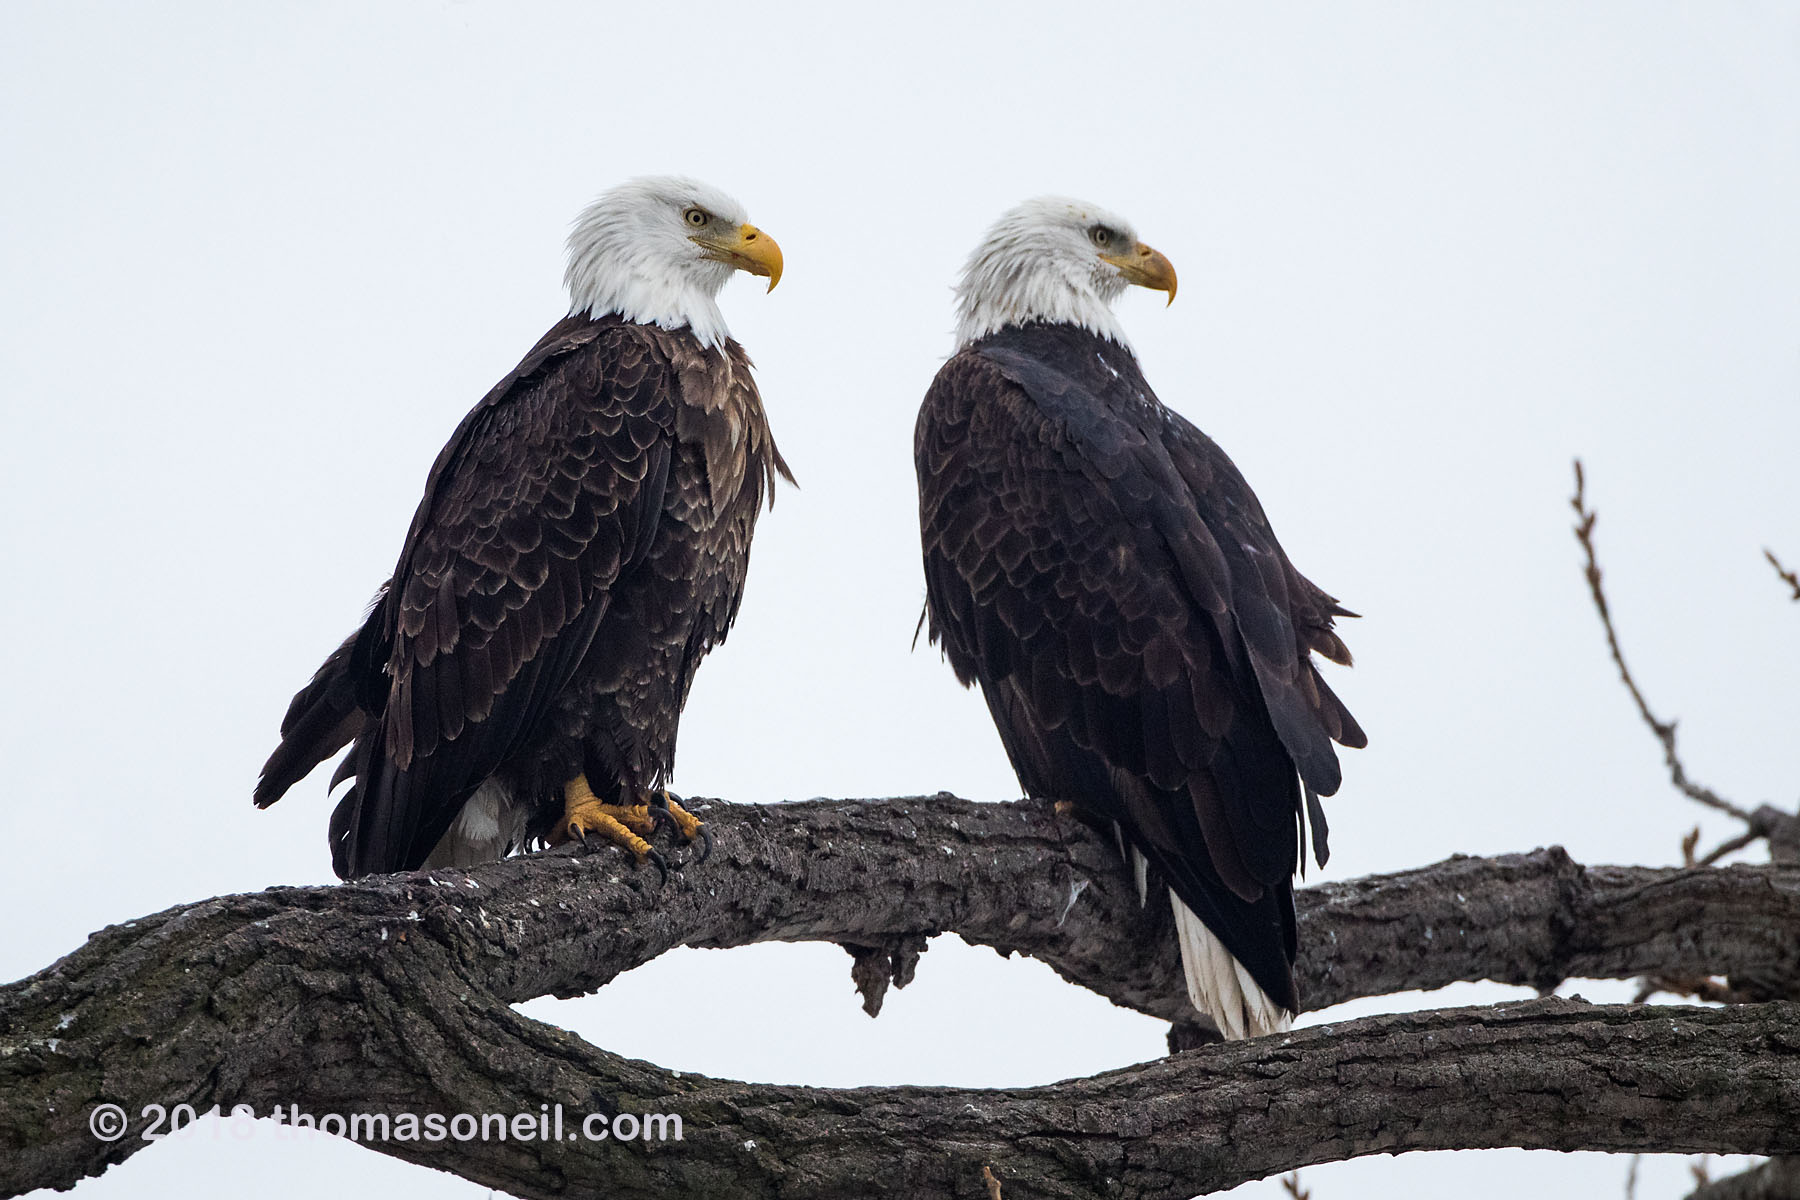 Bald eagles, Keokuk, Iowa.  This image was taken with Canon M100 on 500mm lens.  The following image was taken with Canon 5D Mark III on same 500mm lens.  Click for next photo.